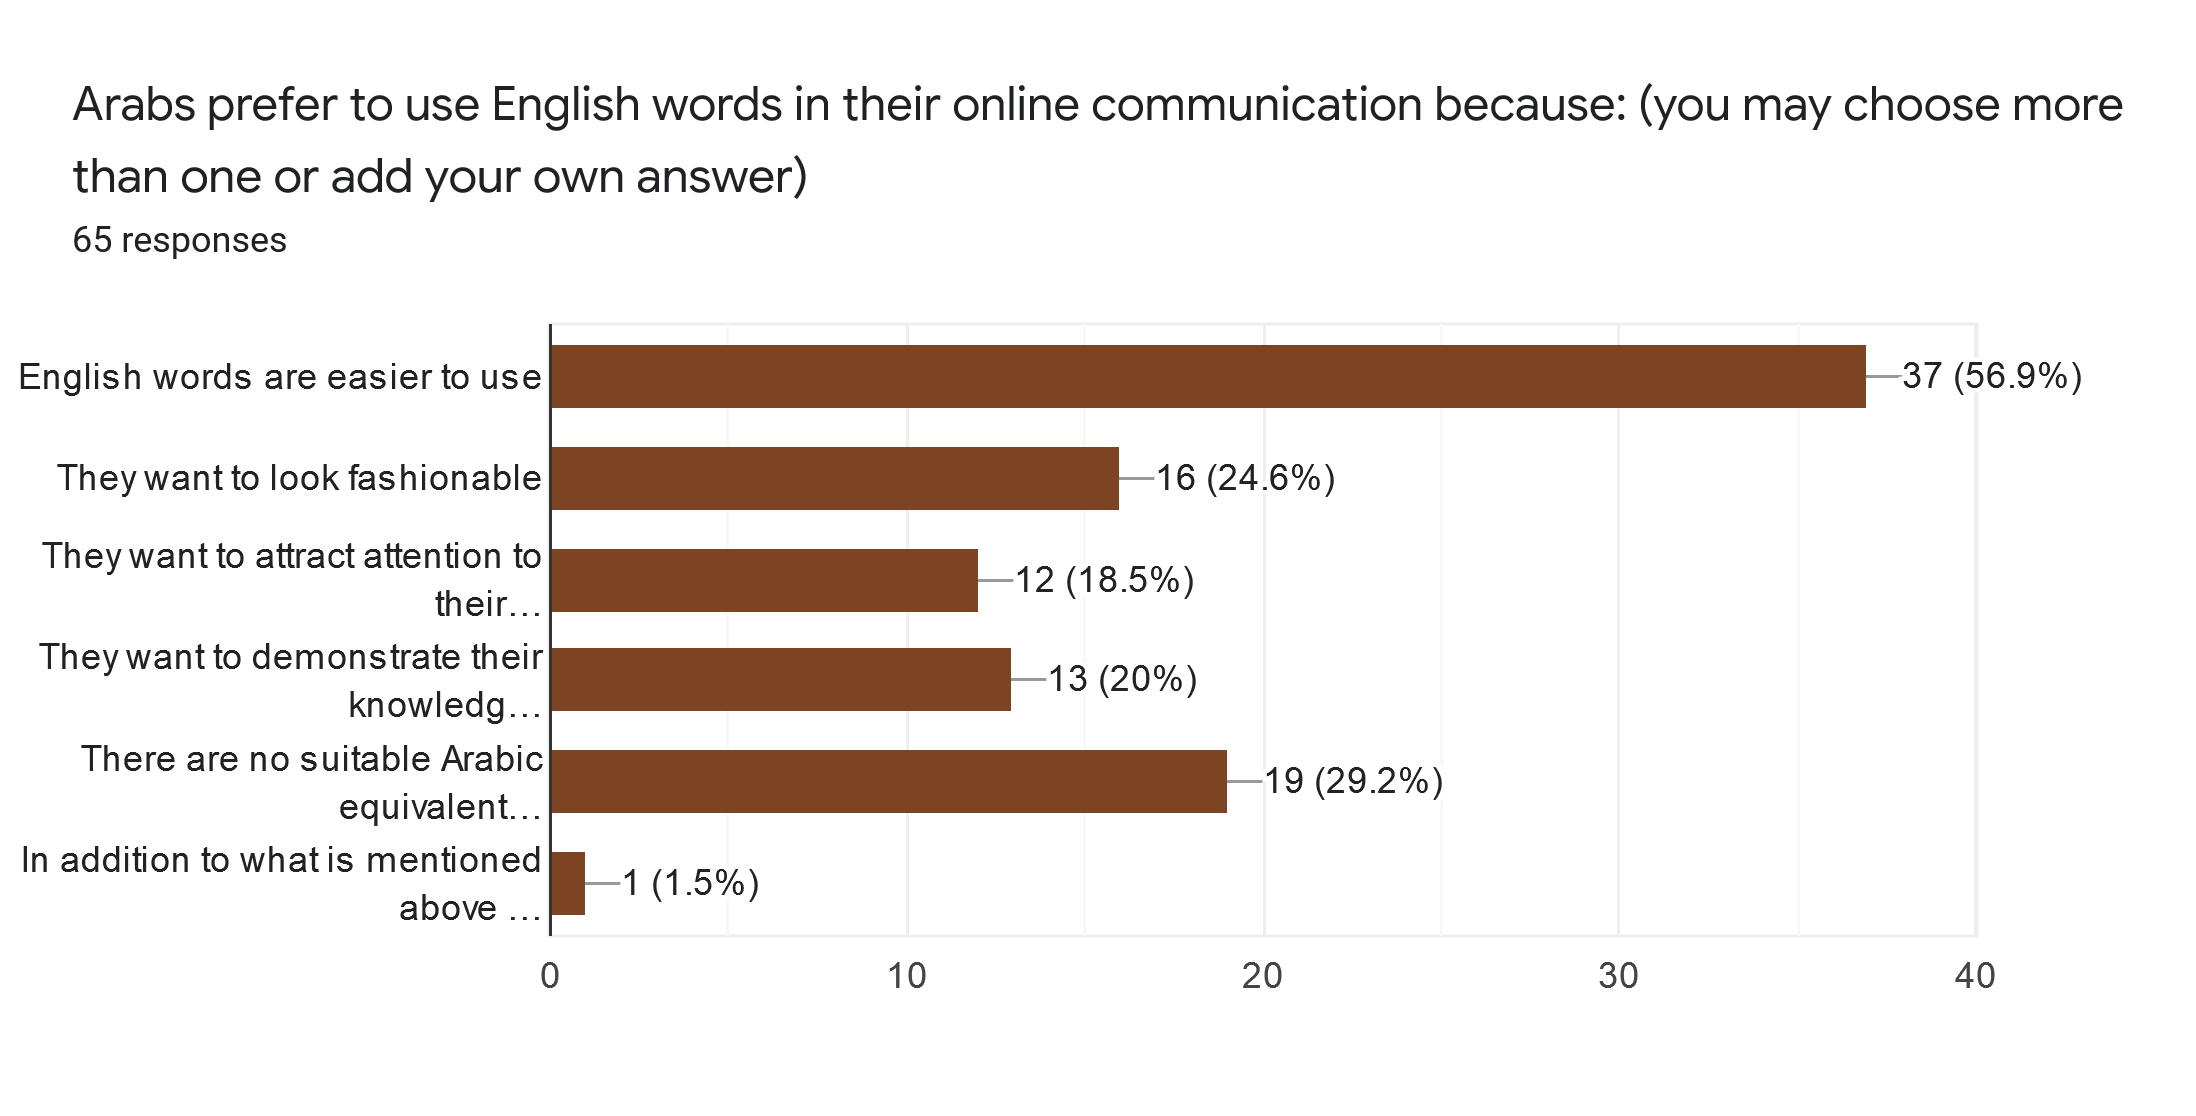 The reported reasons for using English words in Arabic online communication